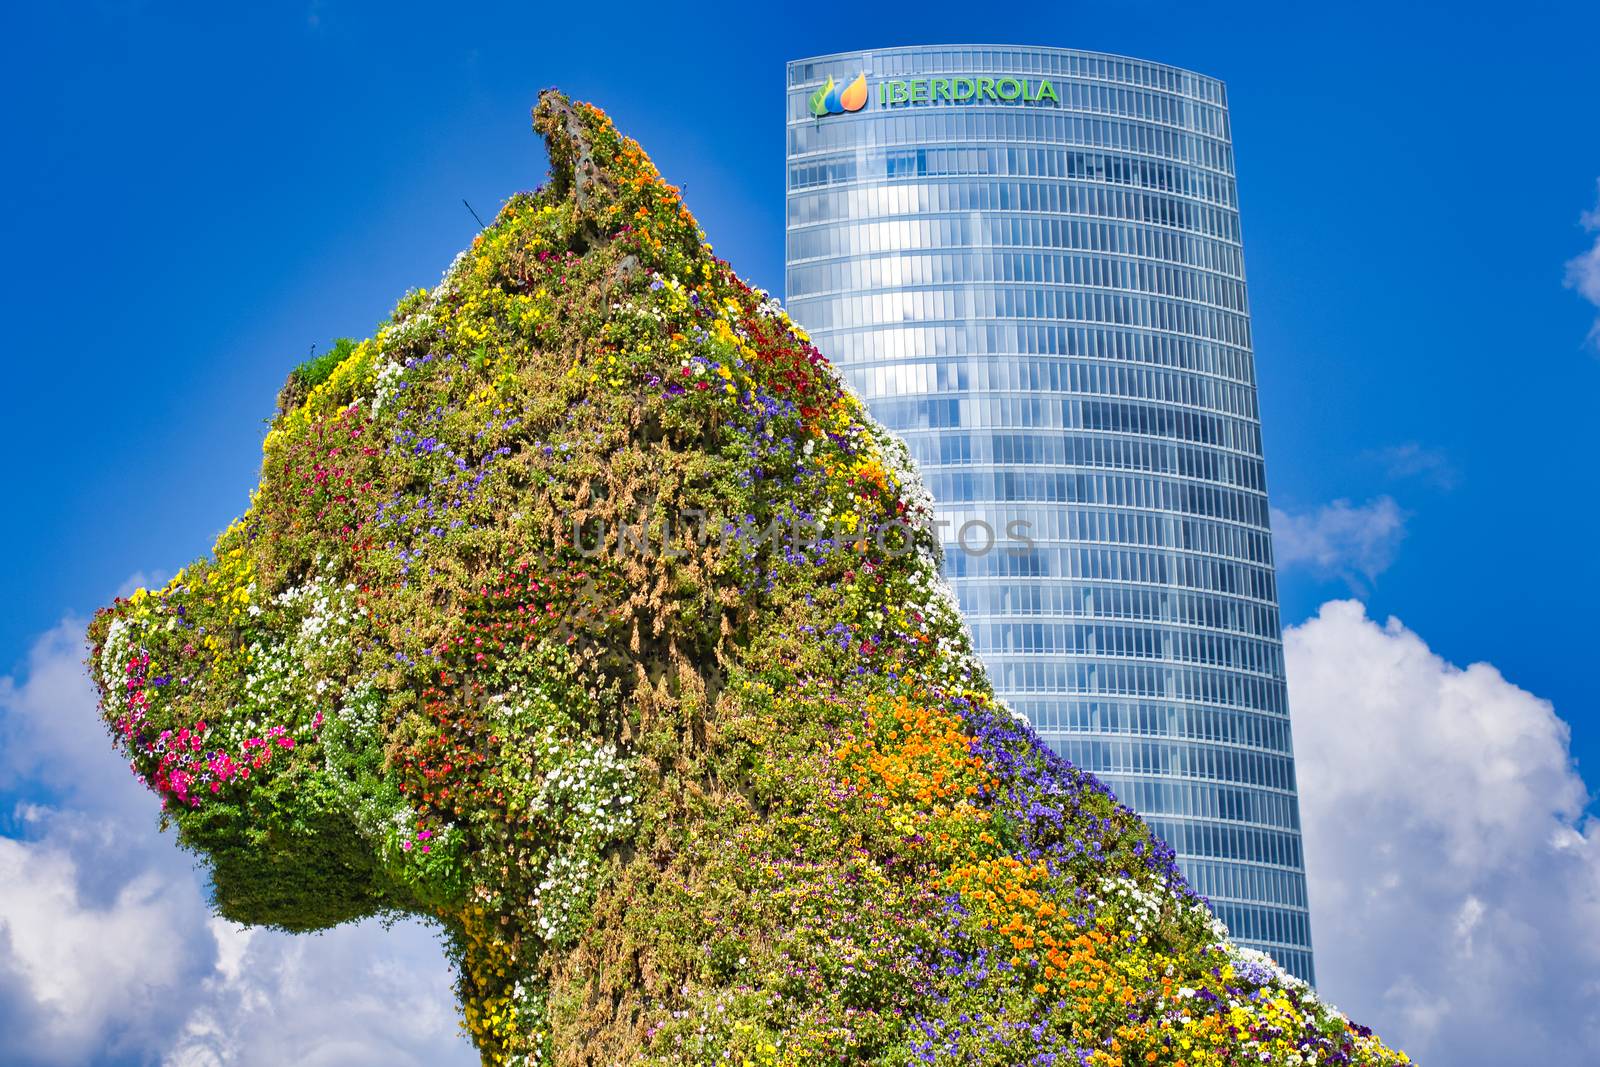 Bilbao, Spain, May 2012: Flower covered dog Puppy guarding the Guggenheim Museum in Bilbao in Spain. Design by Jeff Koons. Travel and tourism.